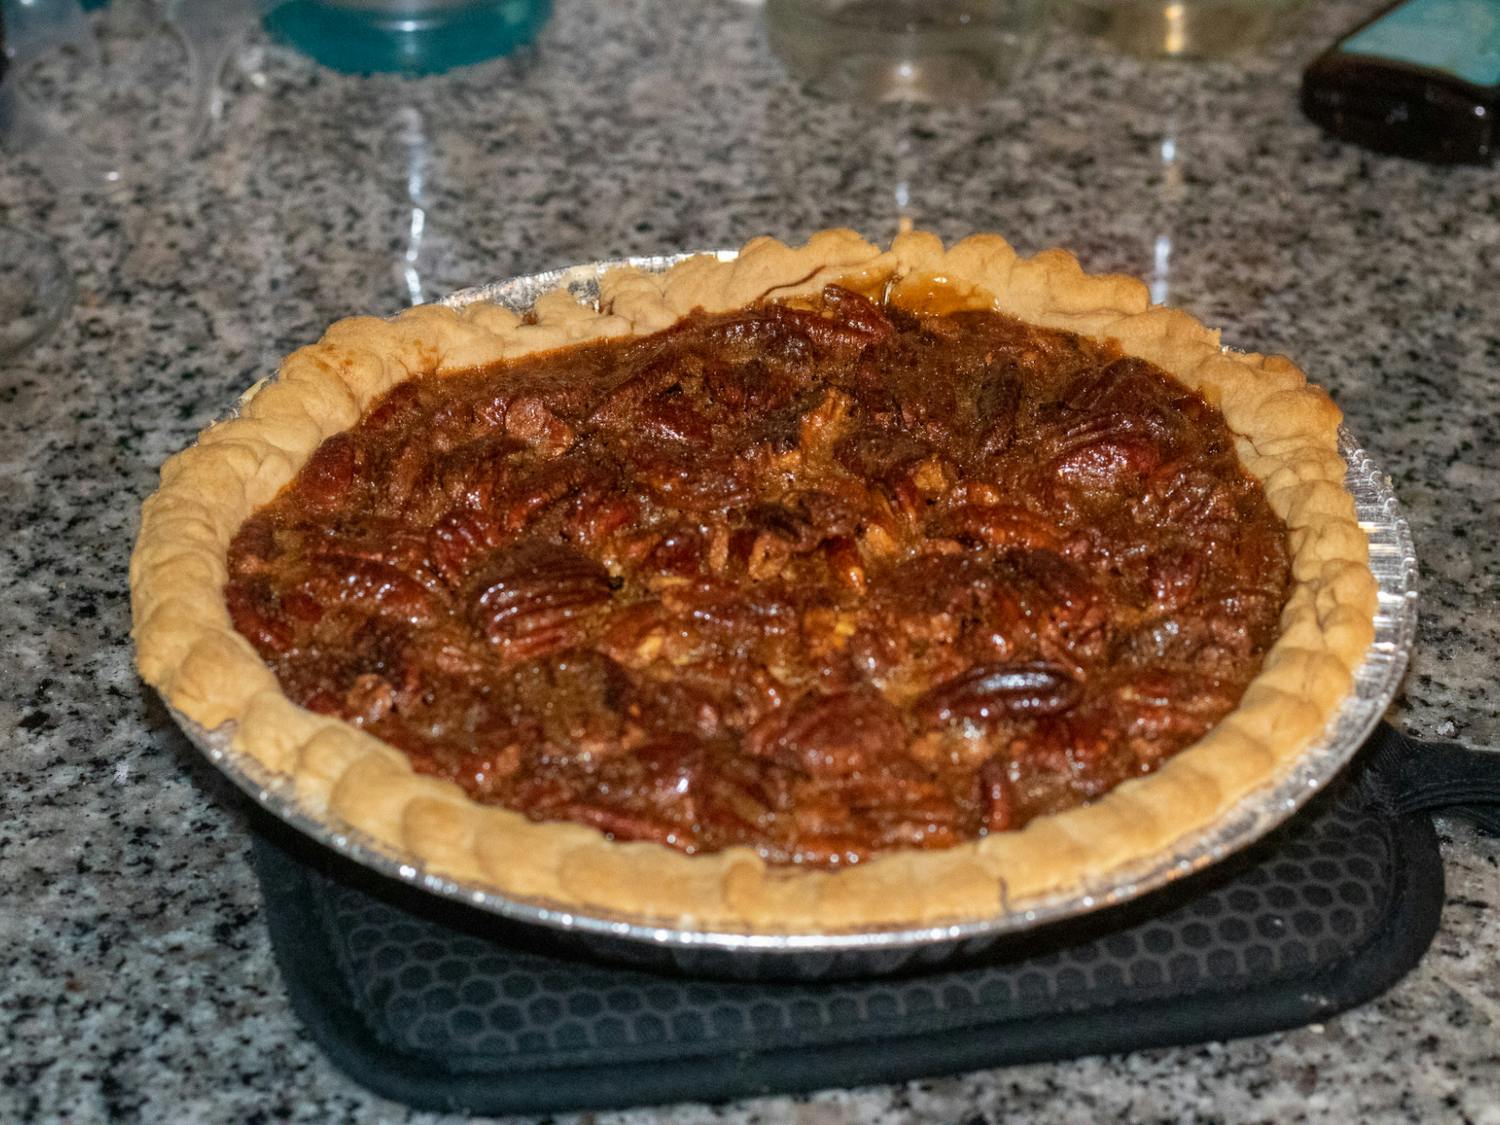 An easy to make, delicious homemade pecan pie cooling on the counter on Jan. 11, 2023. This comfort cooking is a fantastic slice of life that is hard to pass up.